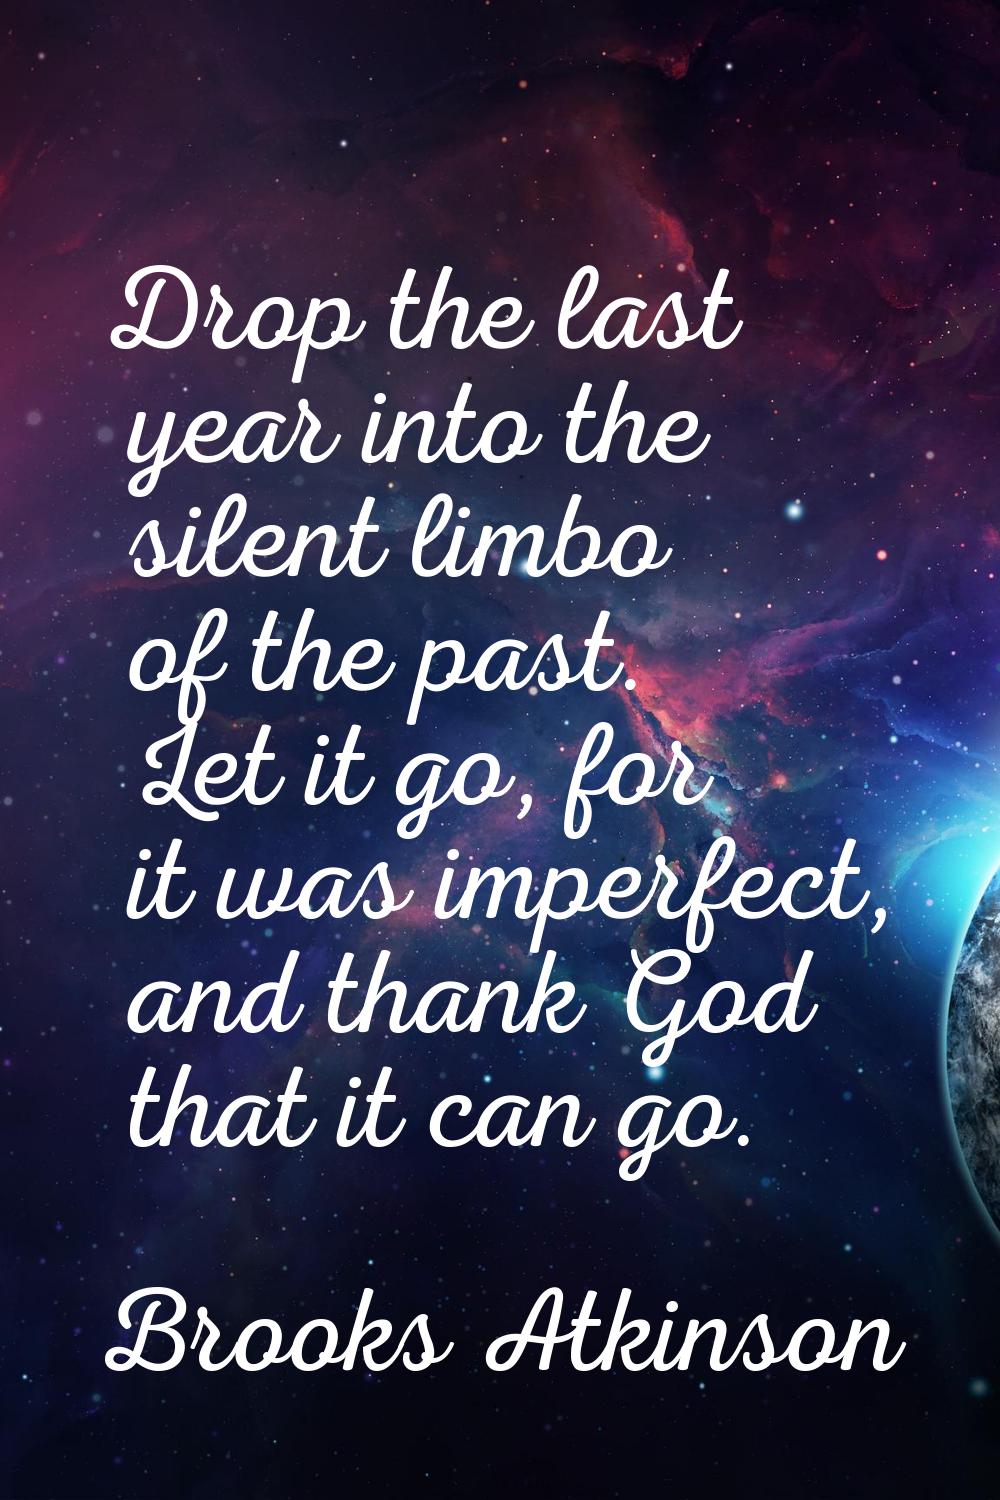 Drop the last year into the silent limbo of the past. Let it go, for it was imperfect, and thank Go